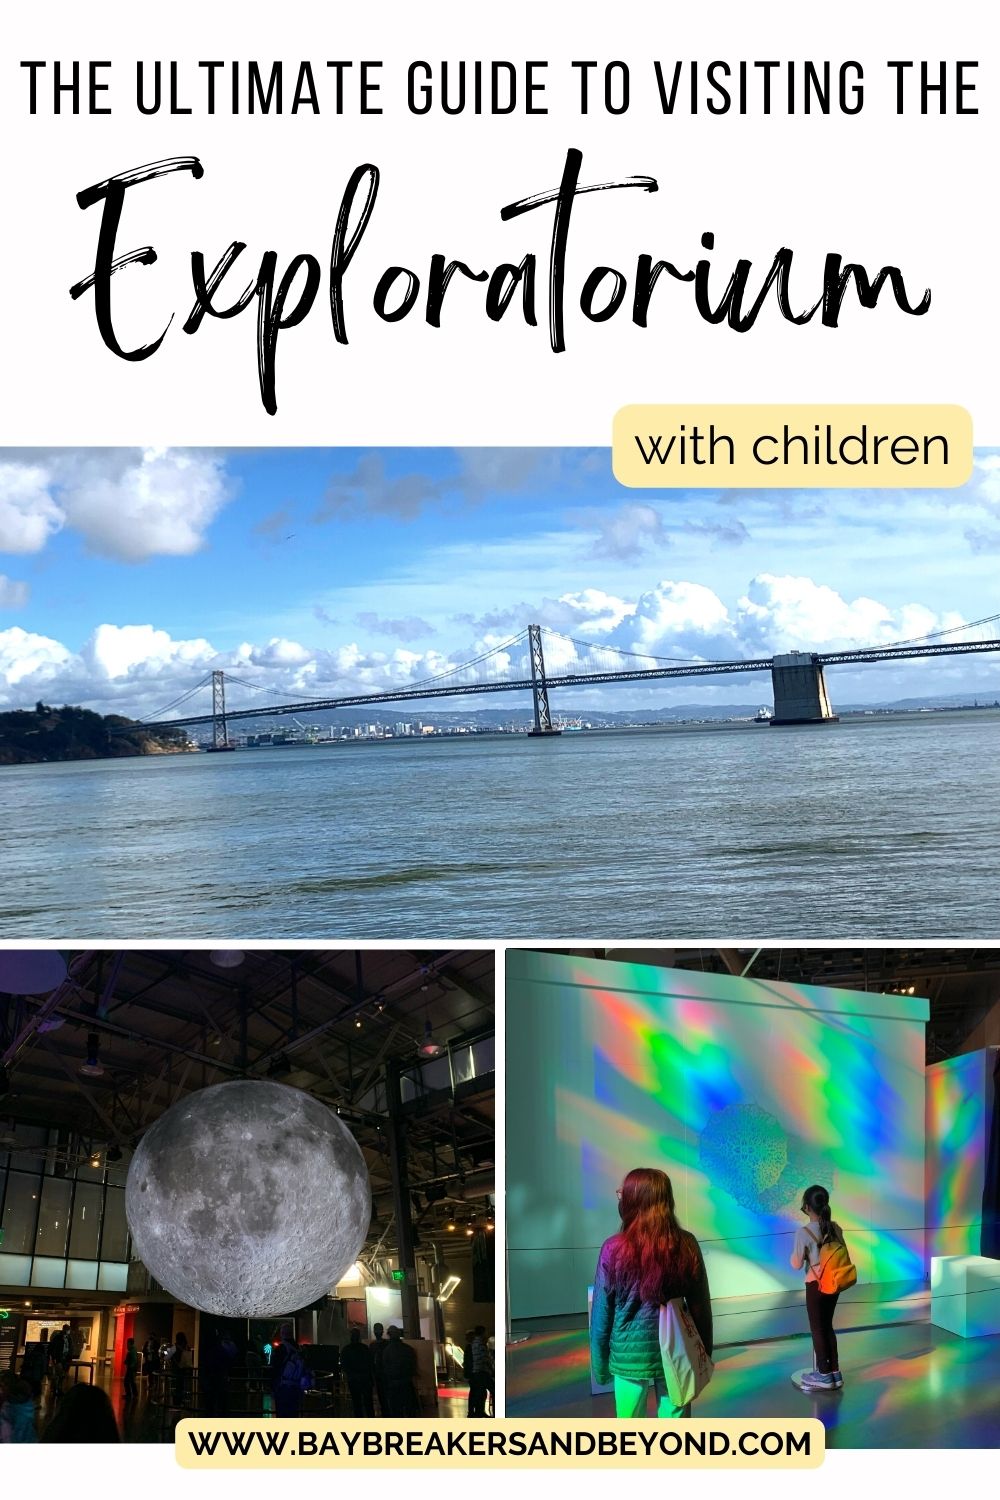 The ultimate guide to visiting the Exploratorium with children